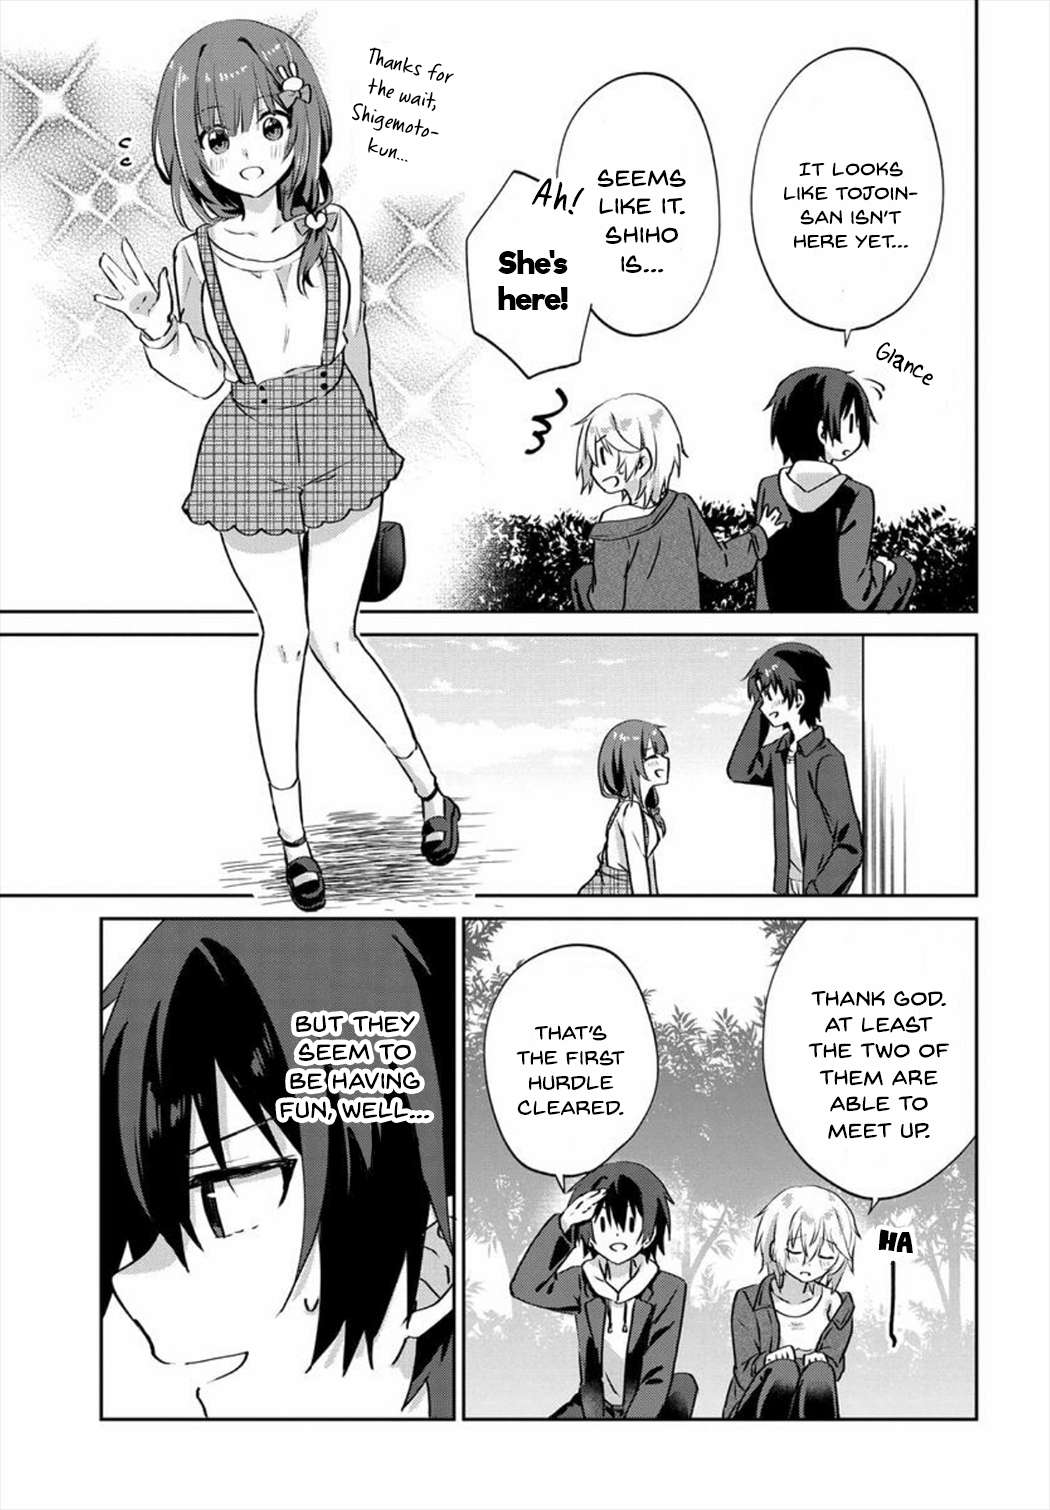 Since I’Ve Entered The World Of Romantic Comedy Manga, I’Ll Do My Best To Make The Losing Heroine Happy - chapter 6.2 - #6